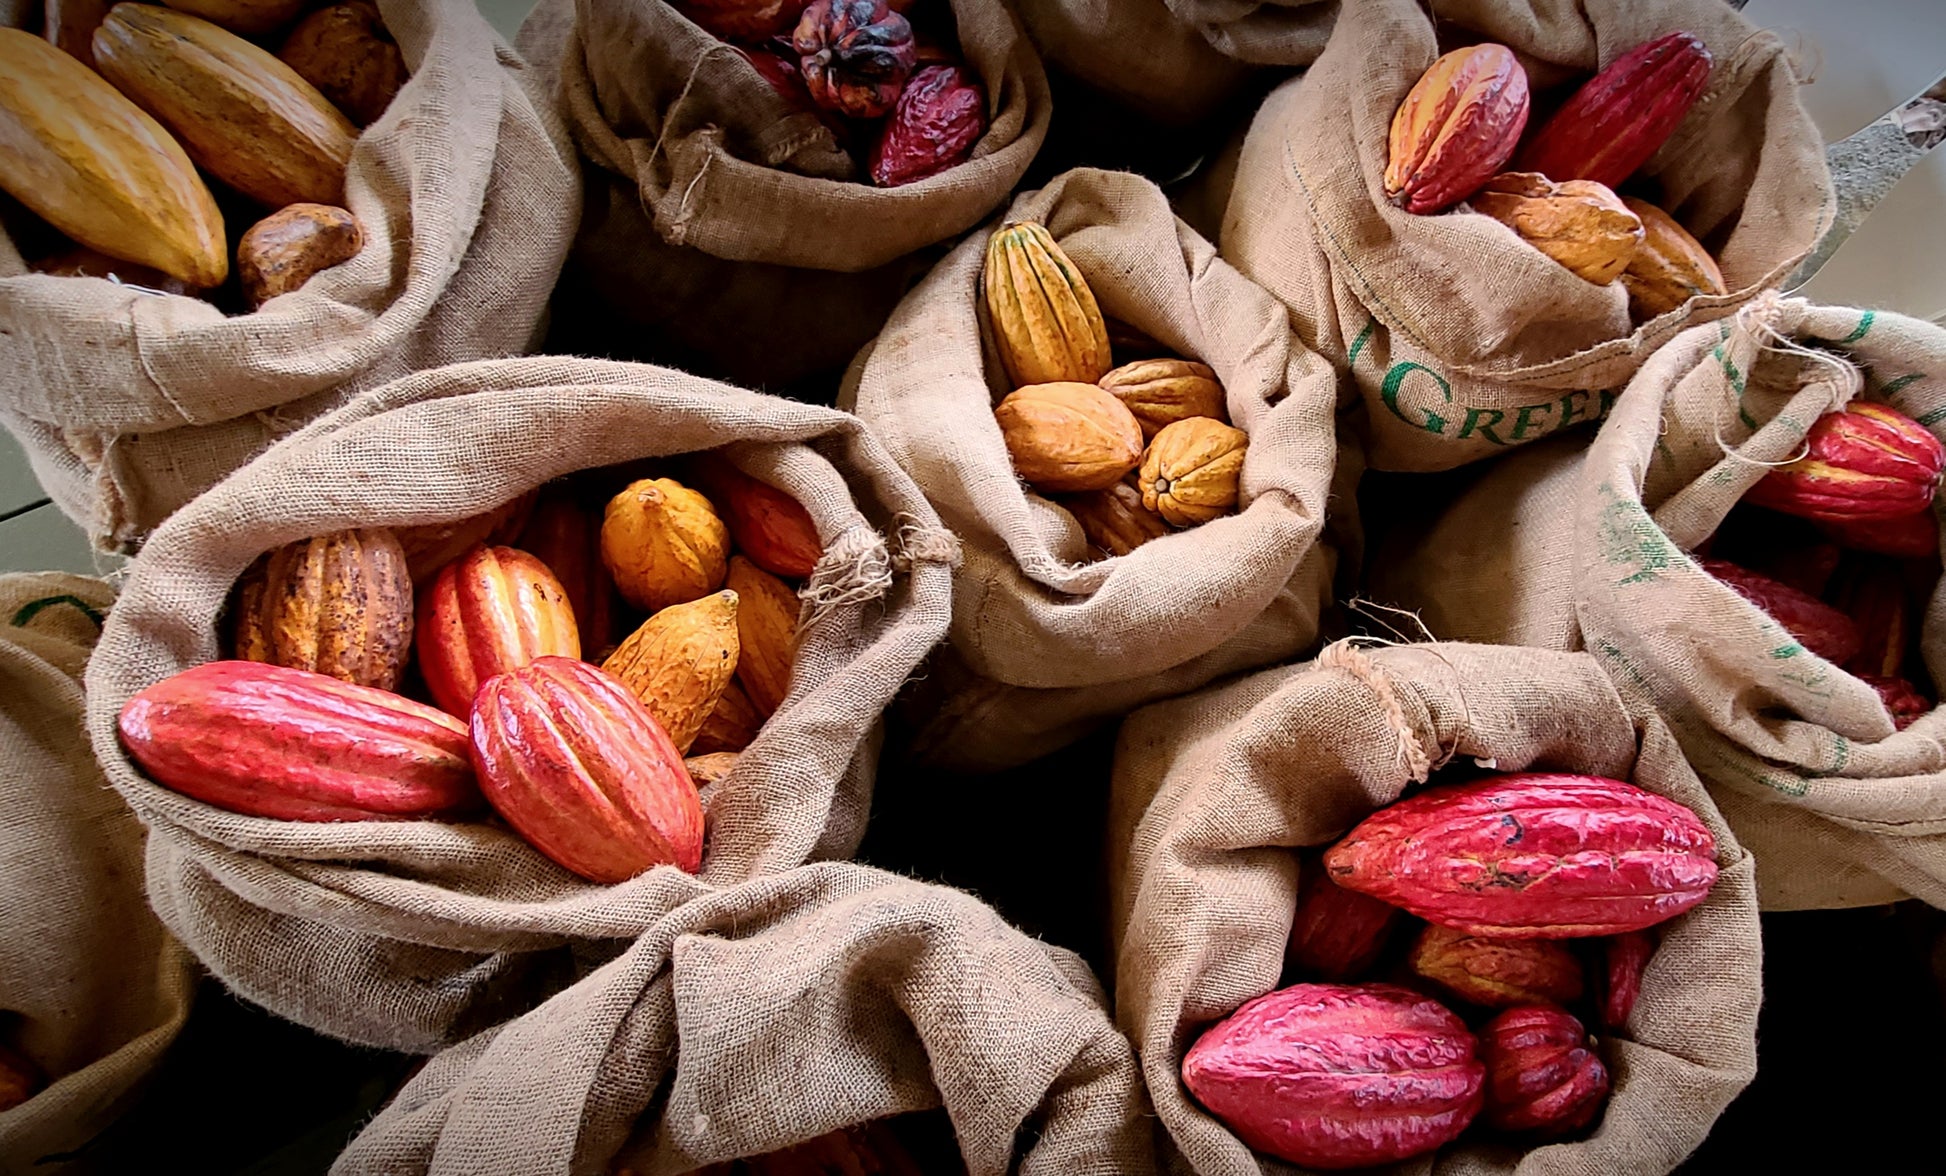 Kona cacao pods in burlap bags